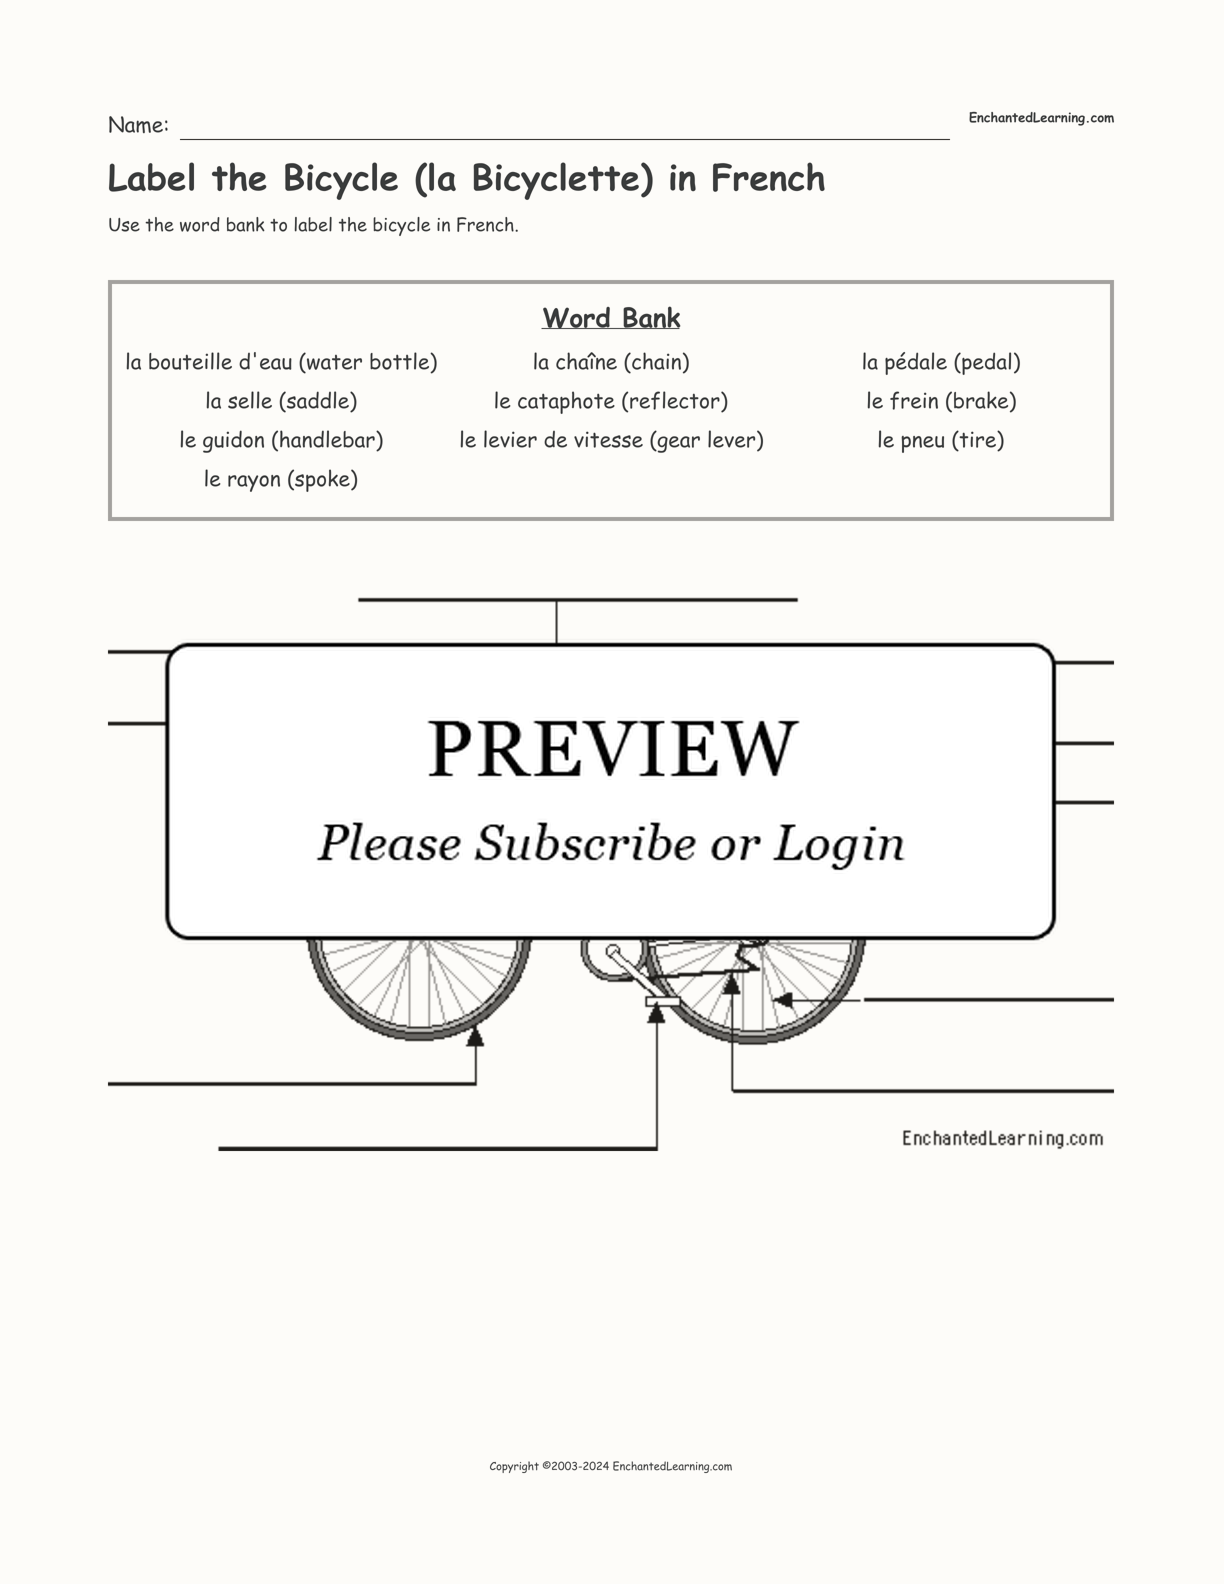 Label the Bicycle (la Bicyclette) in French interactive worksheet page 1